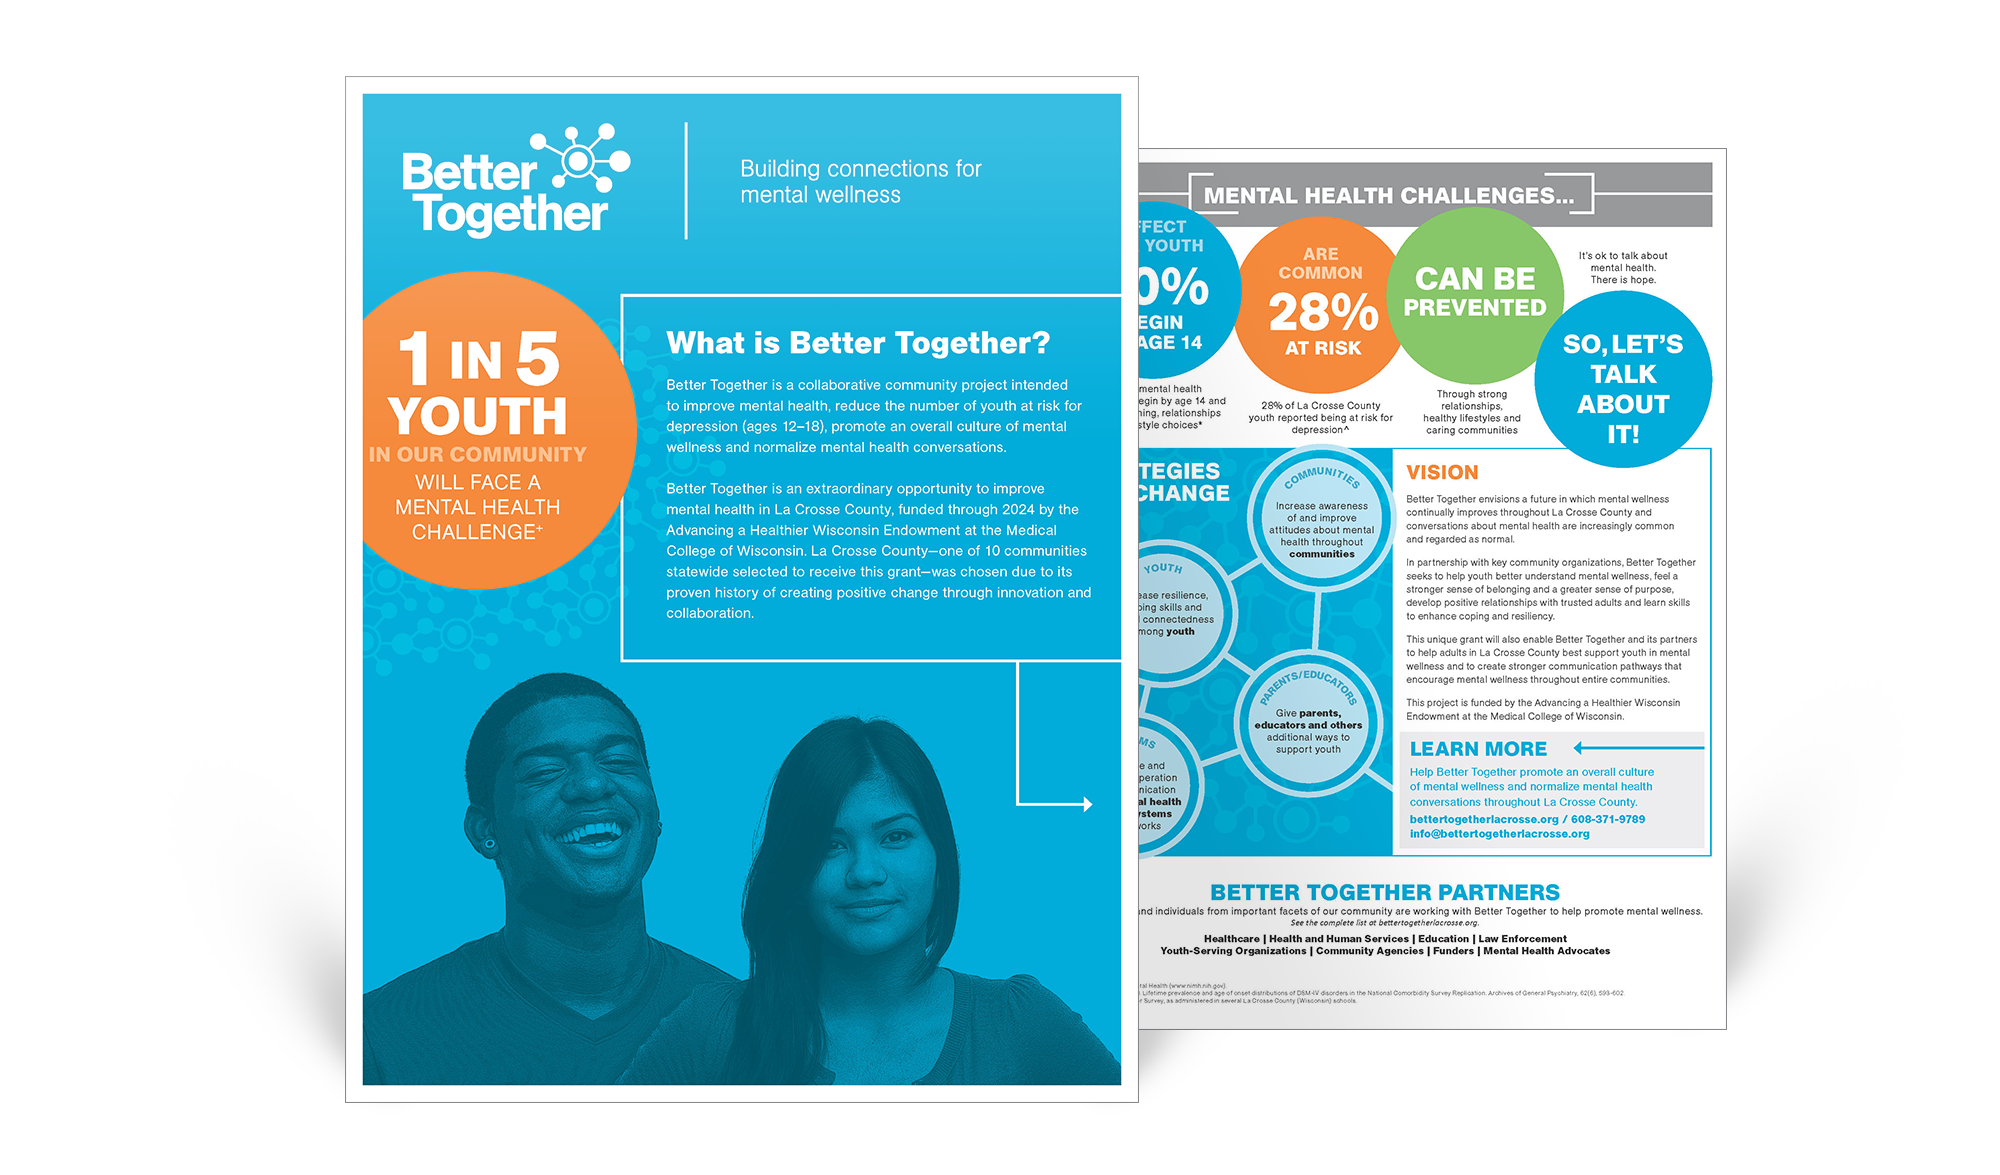 Better Together 4-color fact sheet describing program goals and vision, as well as mental health challenges and strategies